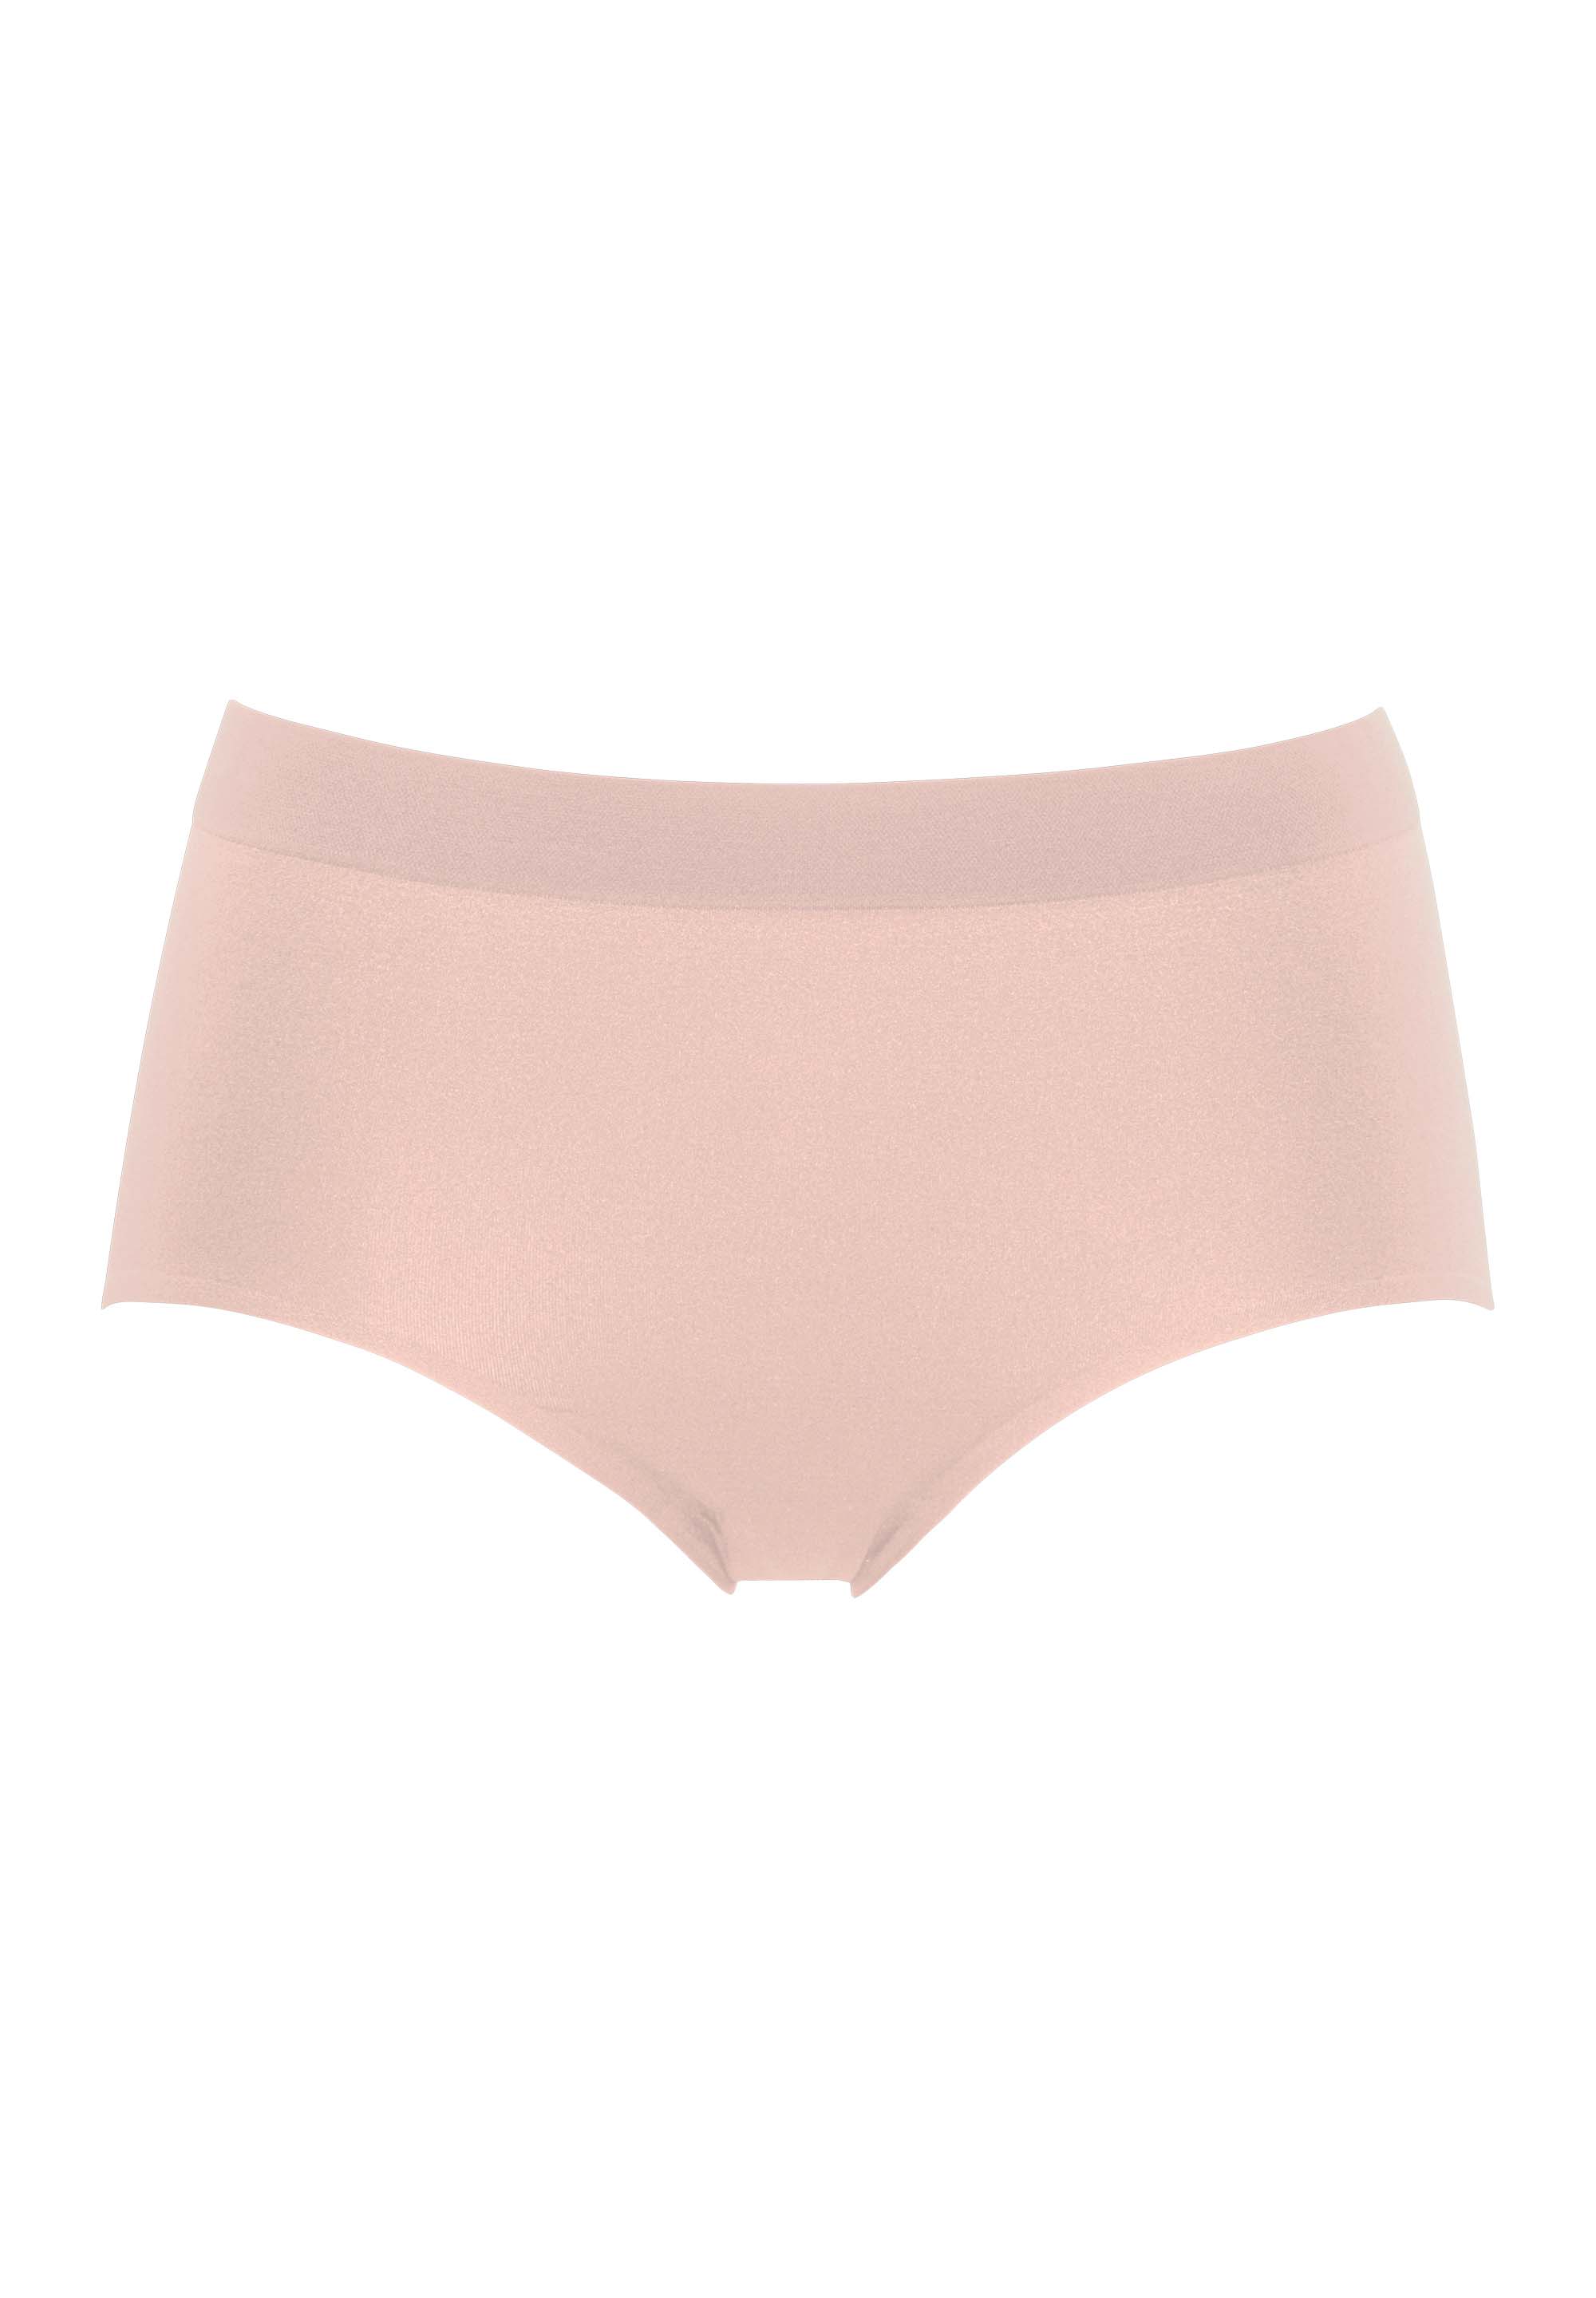 So Confort Nude high-waisted briefs